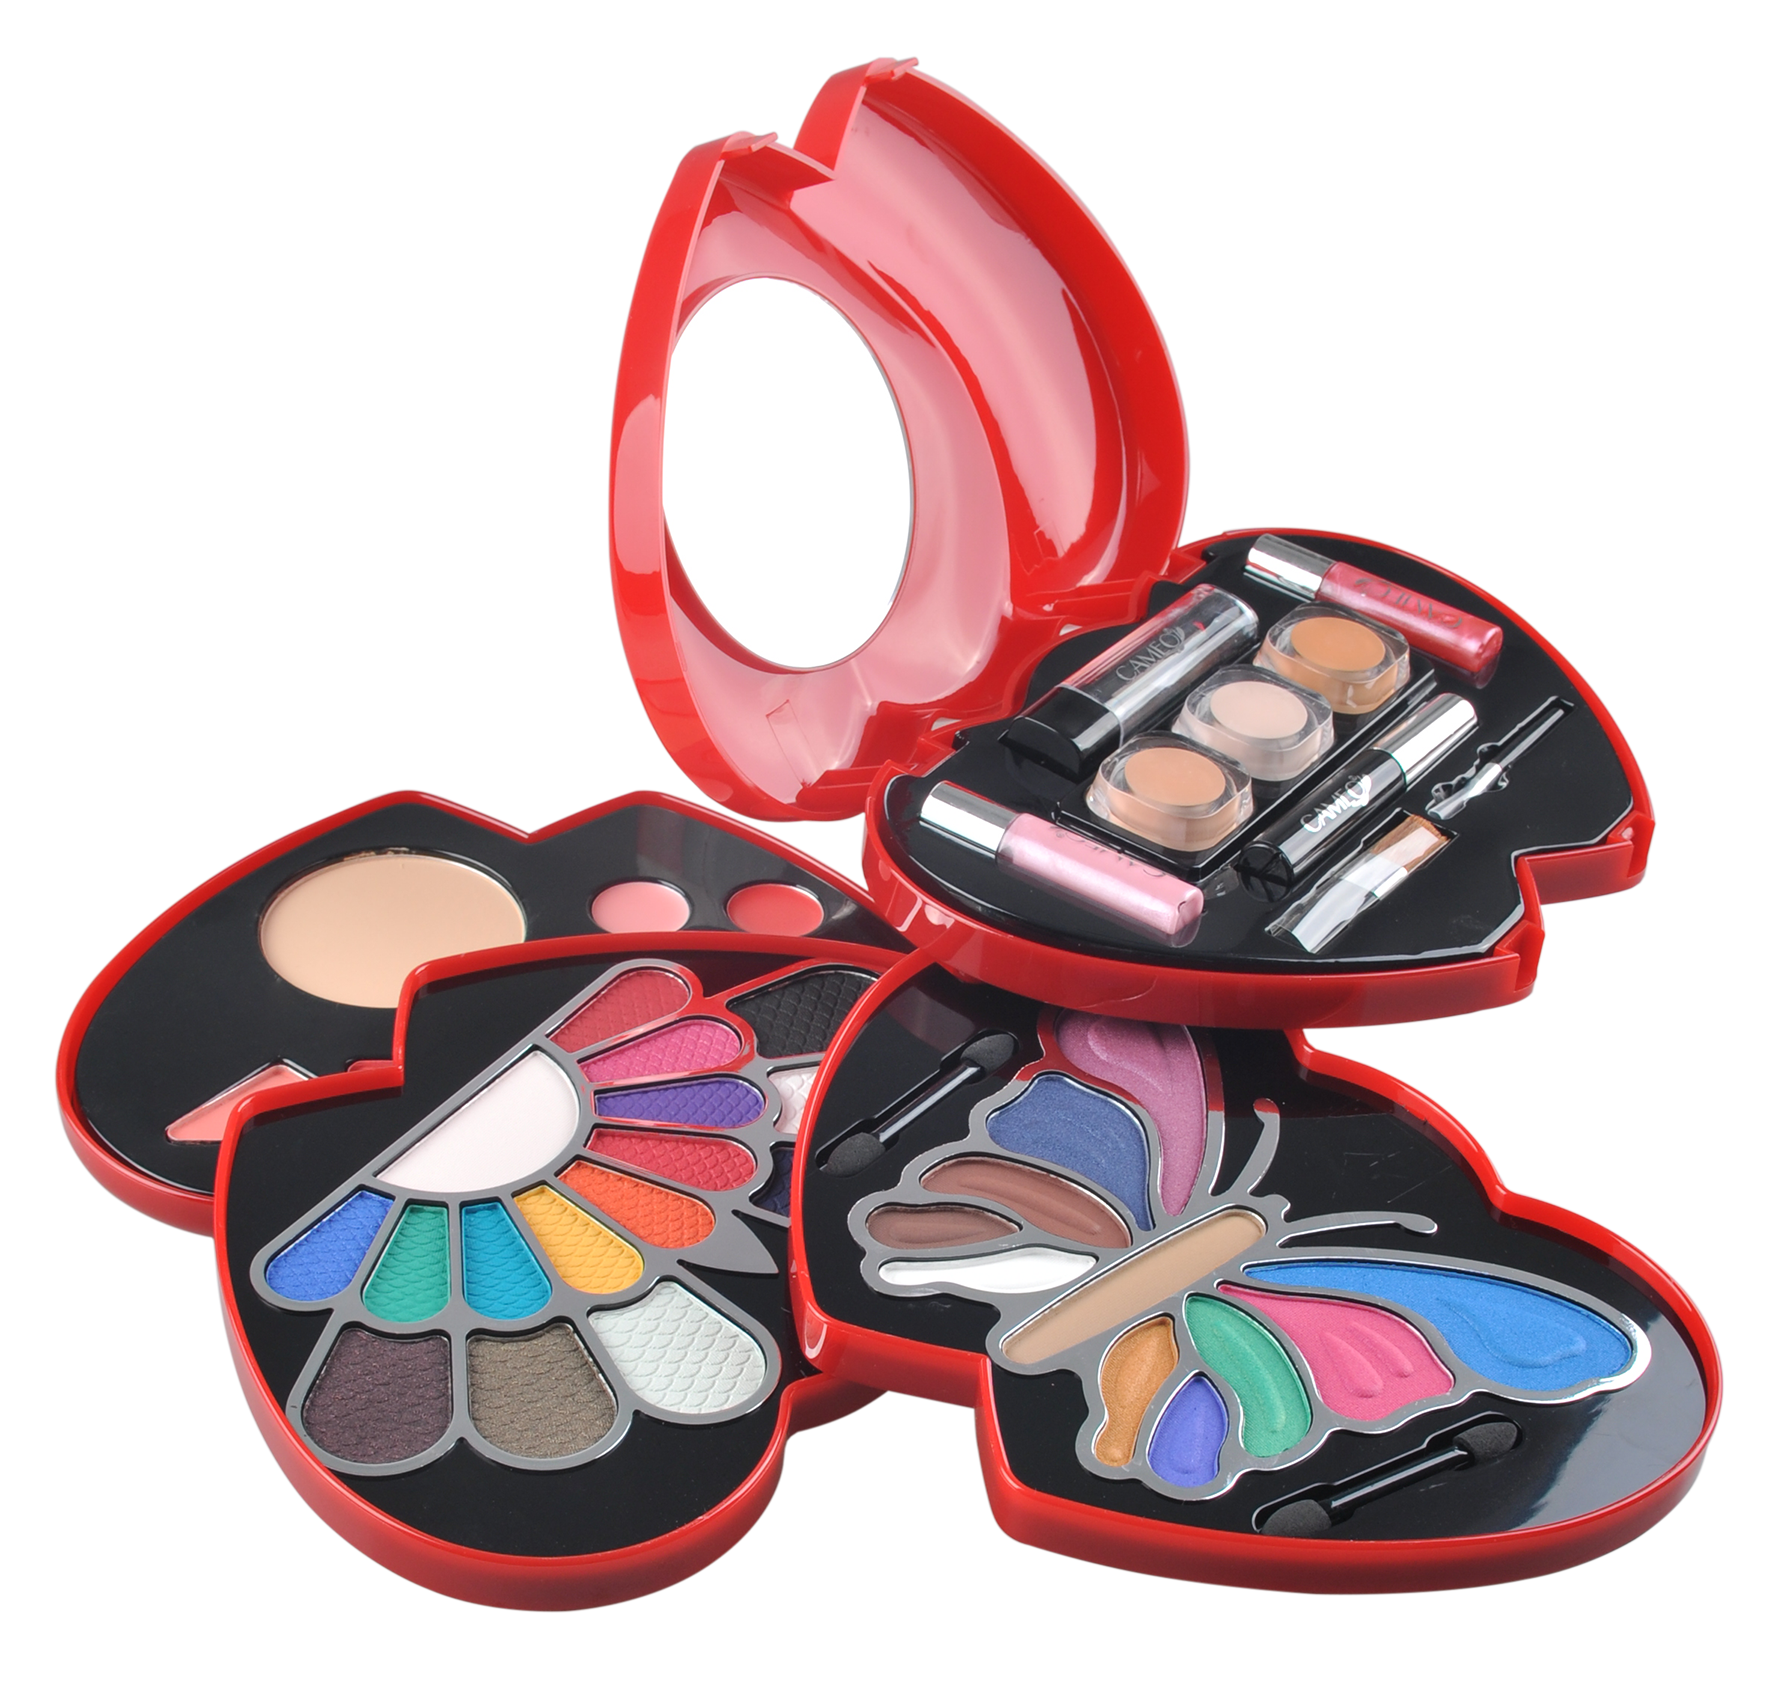 RED DOUBLE HEART GLAMOUR GIRL MAKEUP COLOR KIT